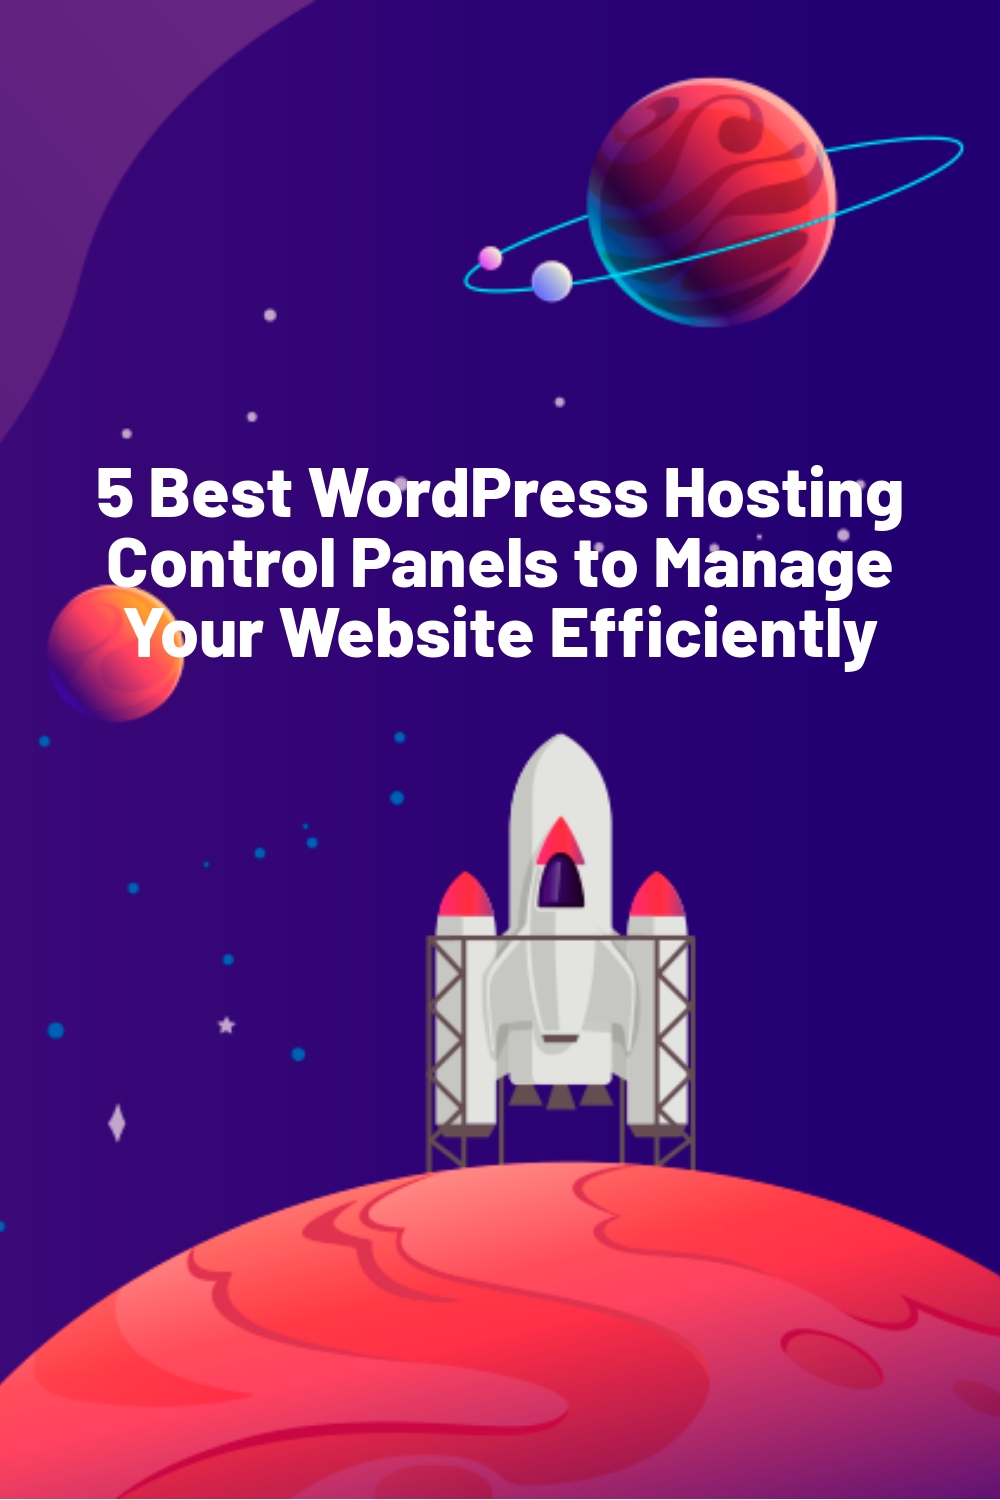 5 Best WordPress Hosting Control Panels to Manage Your Website Efficiently